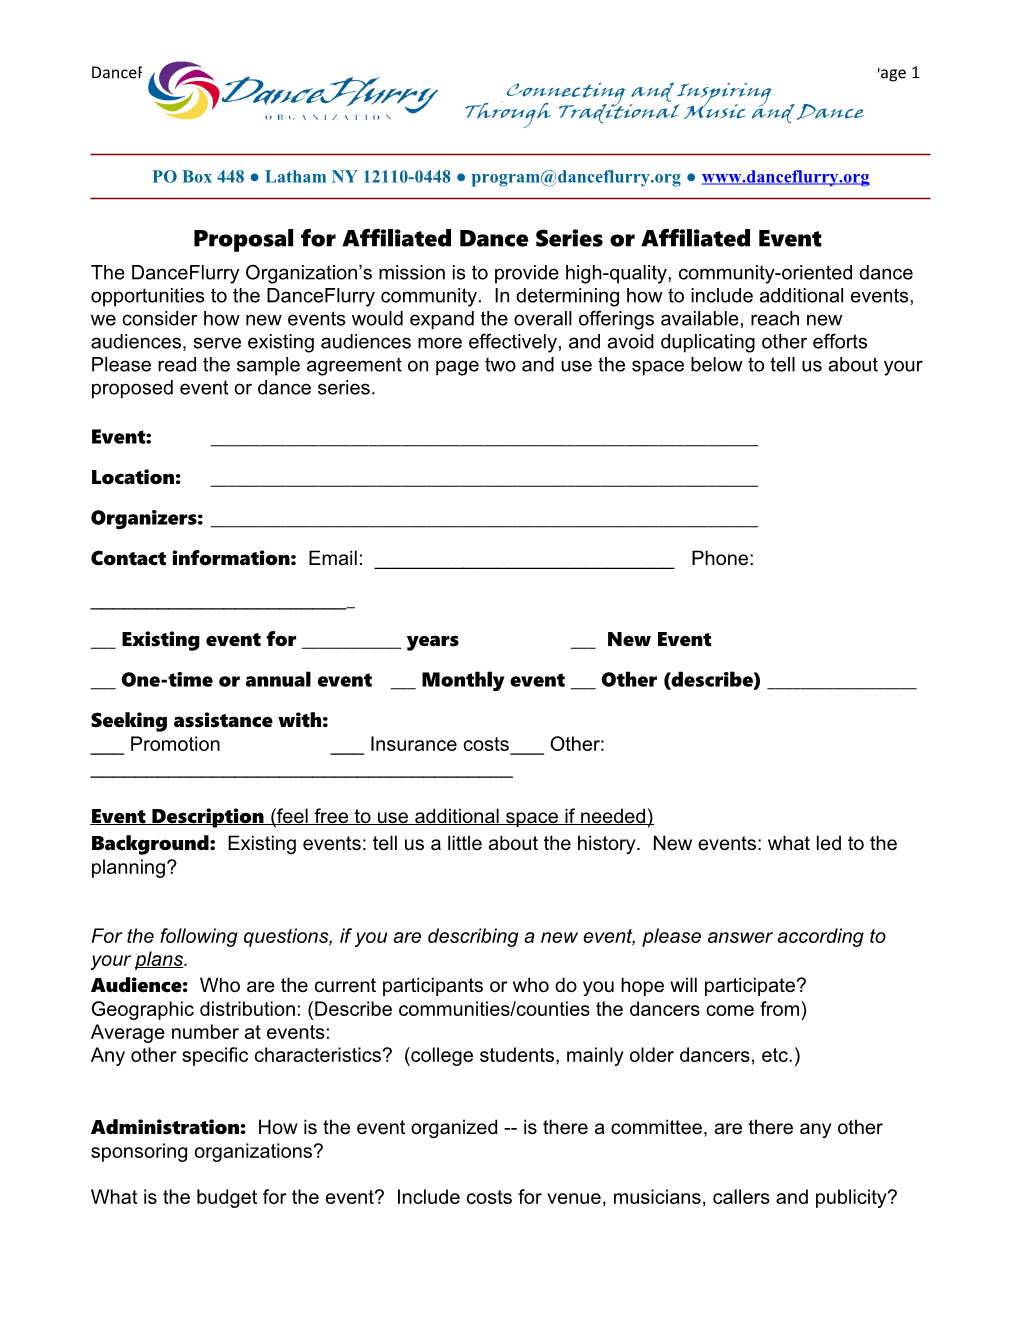 Proposal for Affiliated Dance Series Or Affiliated Event